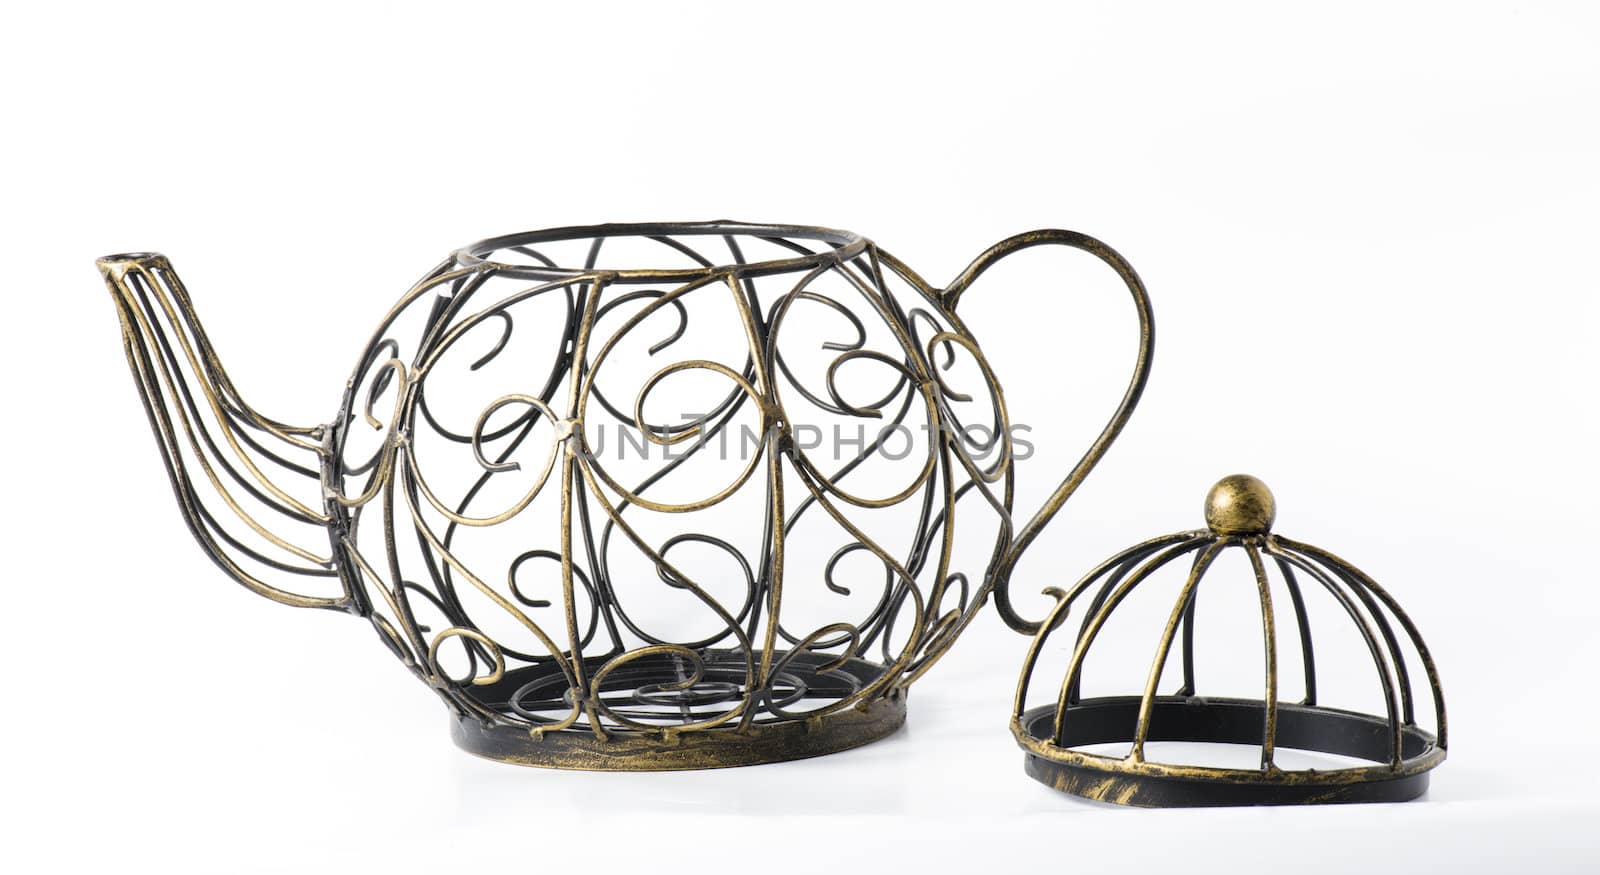 Metal wireframe teapot on white for decoration